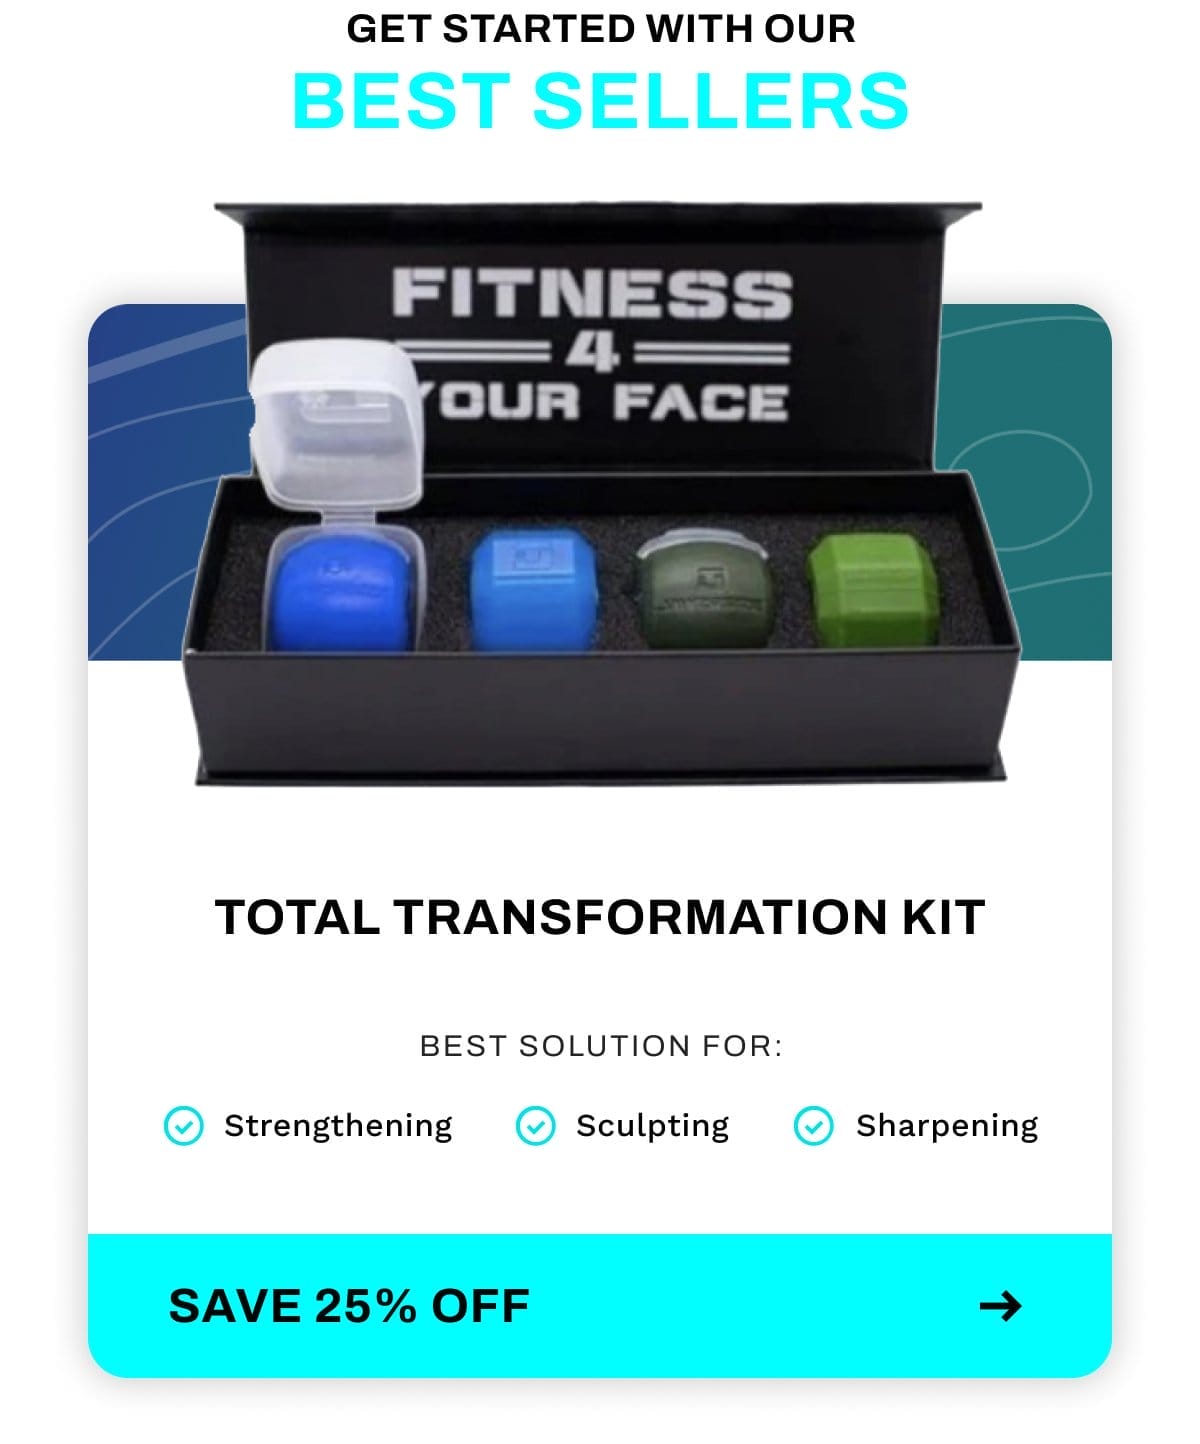 Get the Total Transformation Kit